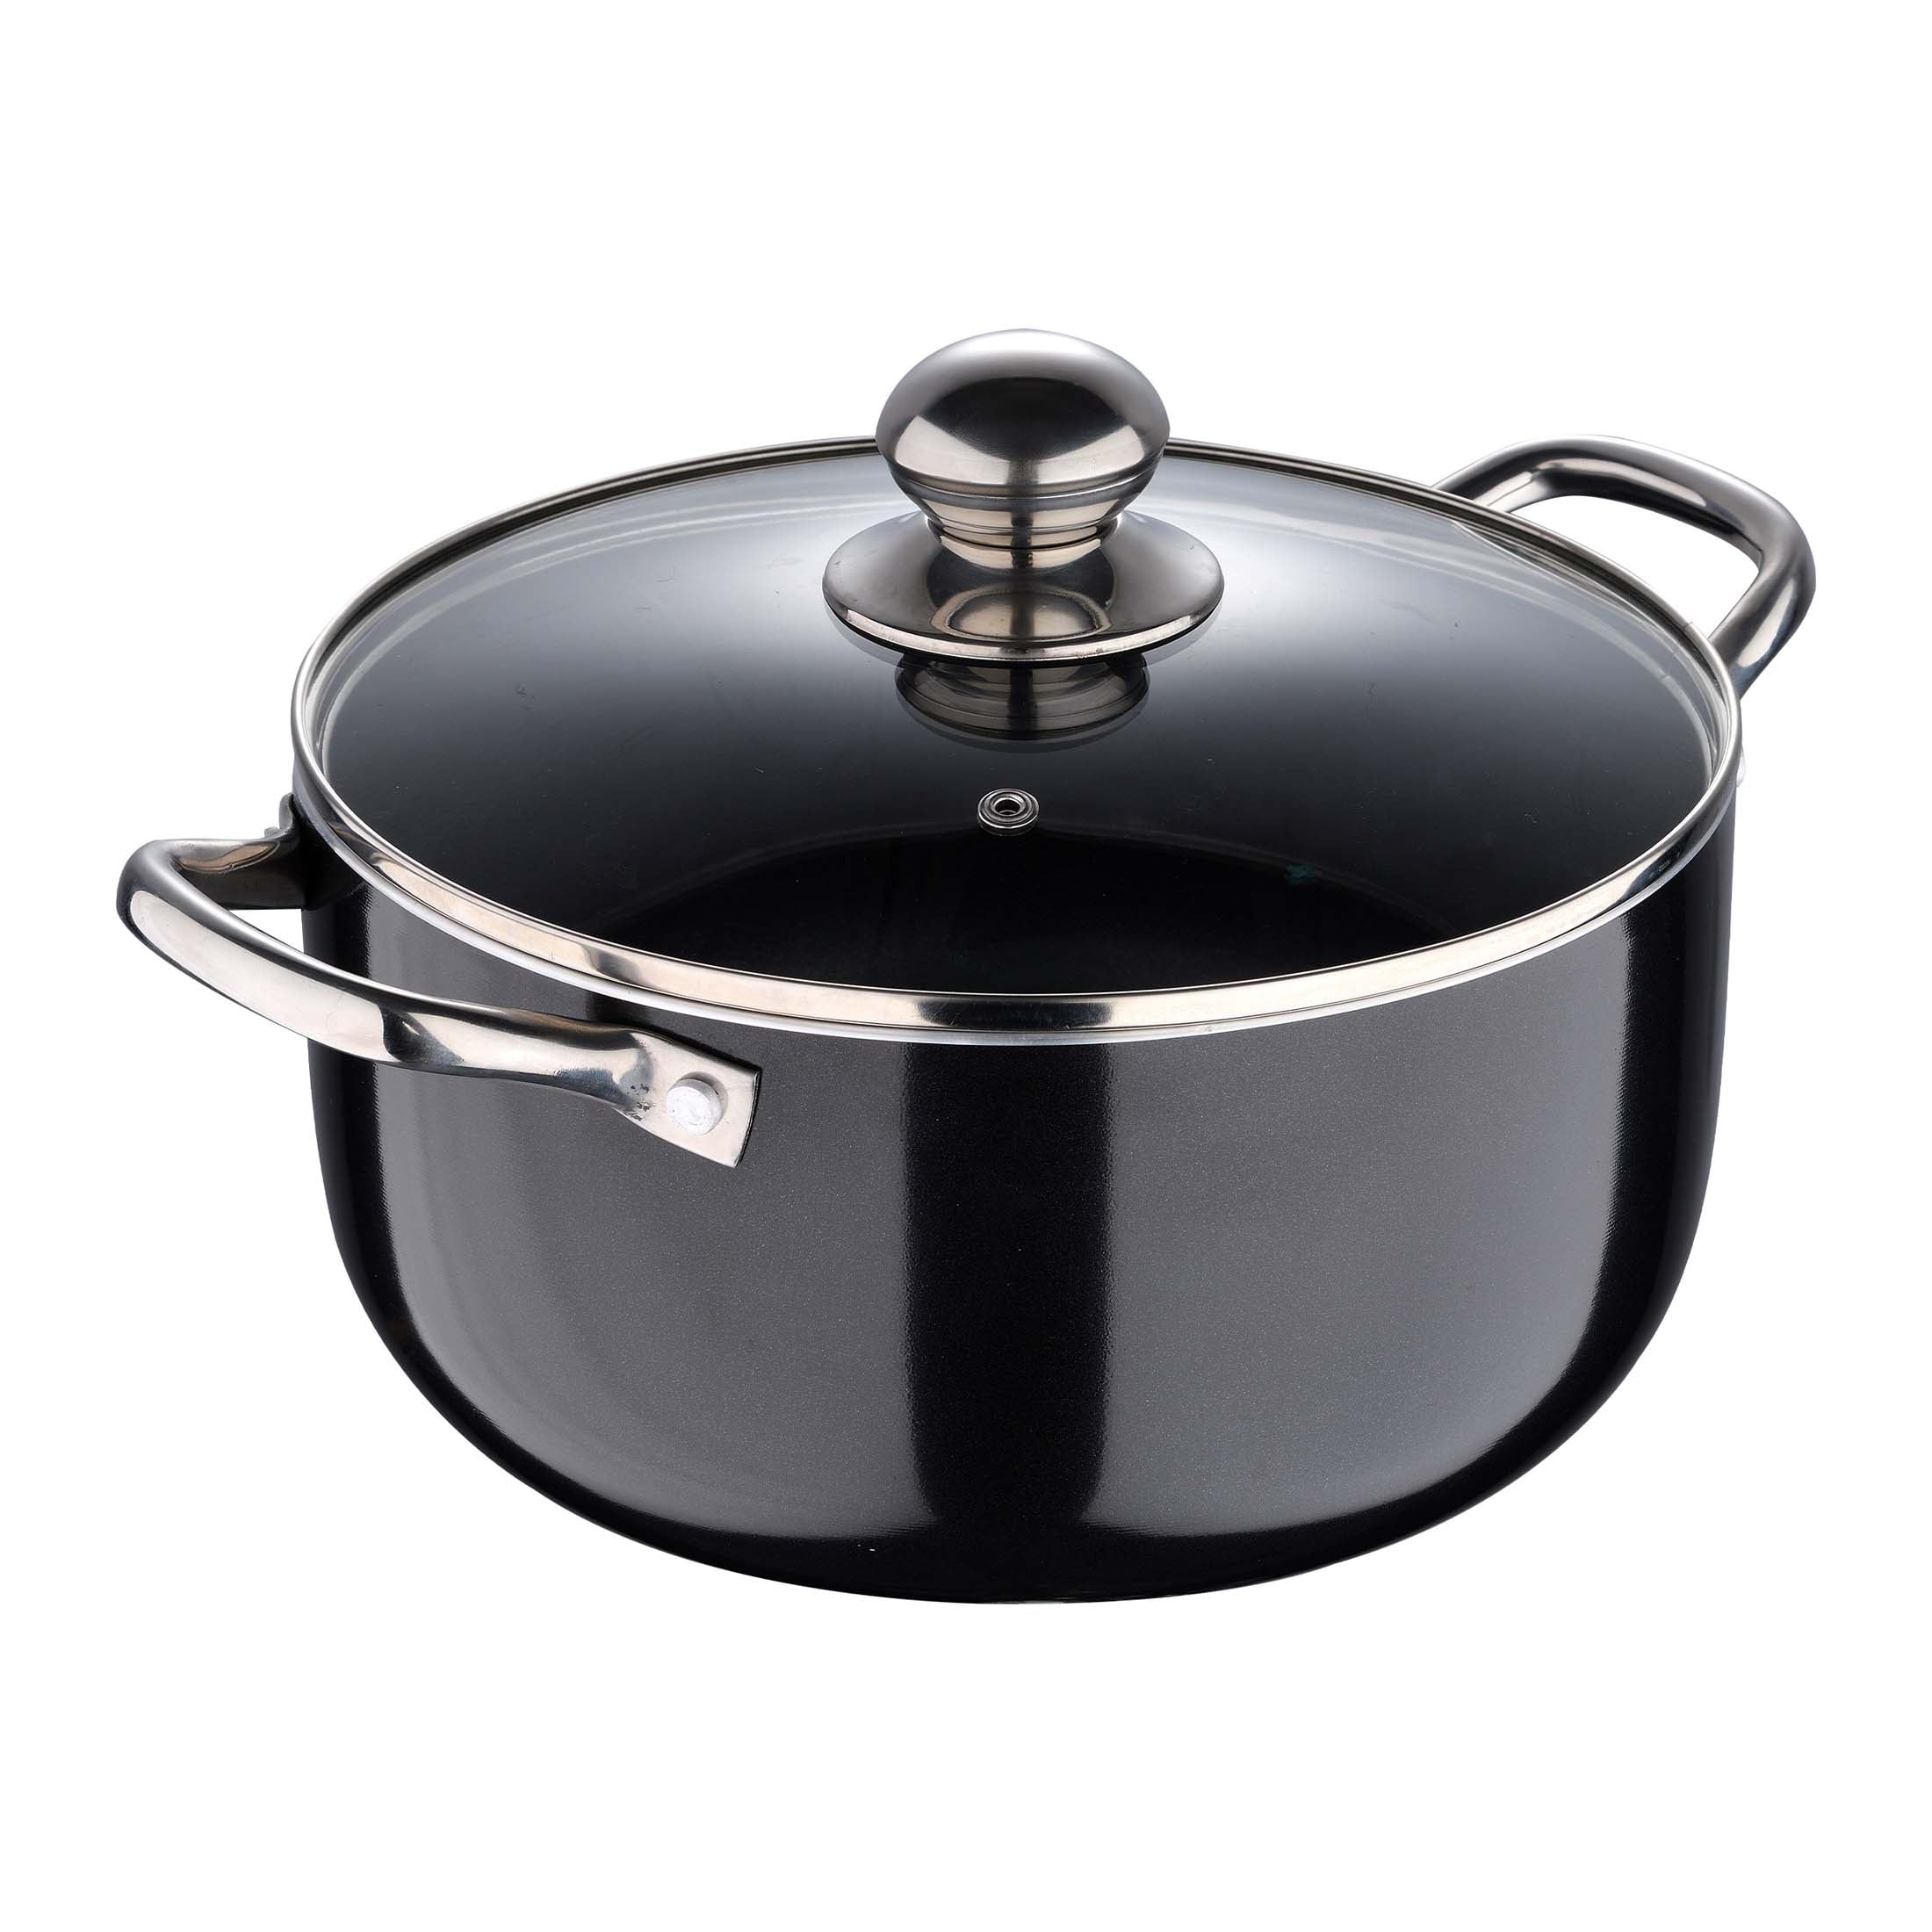 Free Shipping 4.4 Quart Black Caldero (Dutch Oven) with Glass Lid pots for  cooking cookware - AliExpress